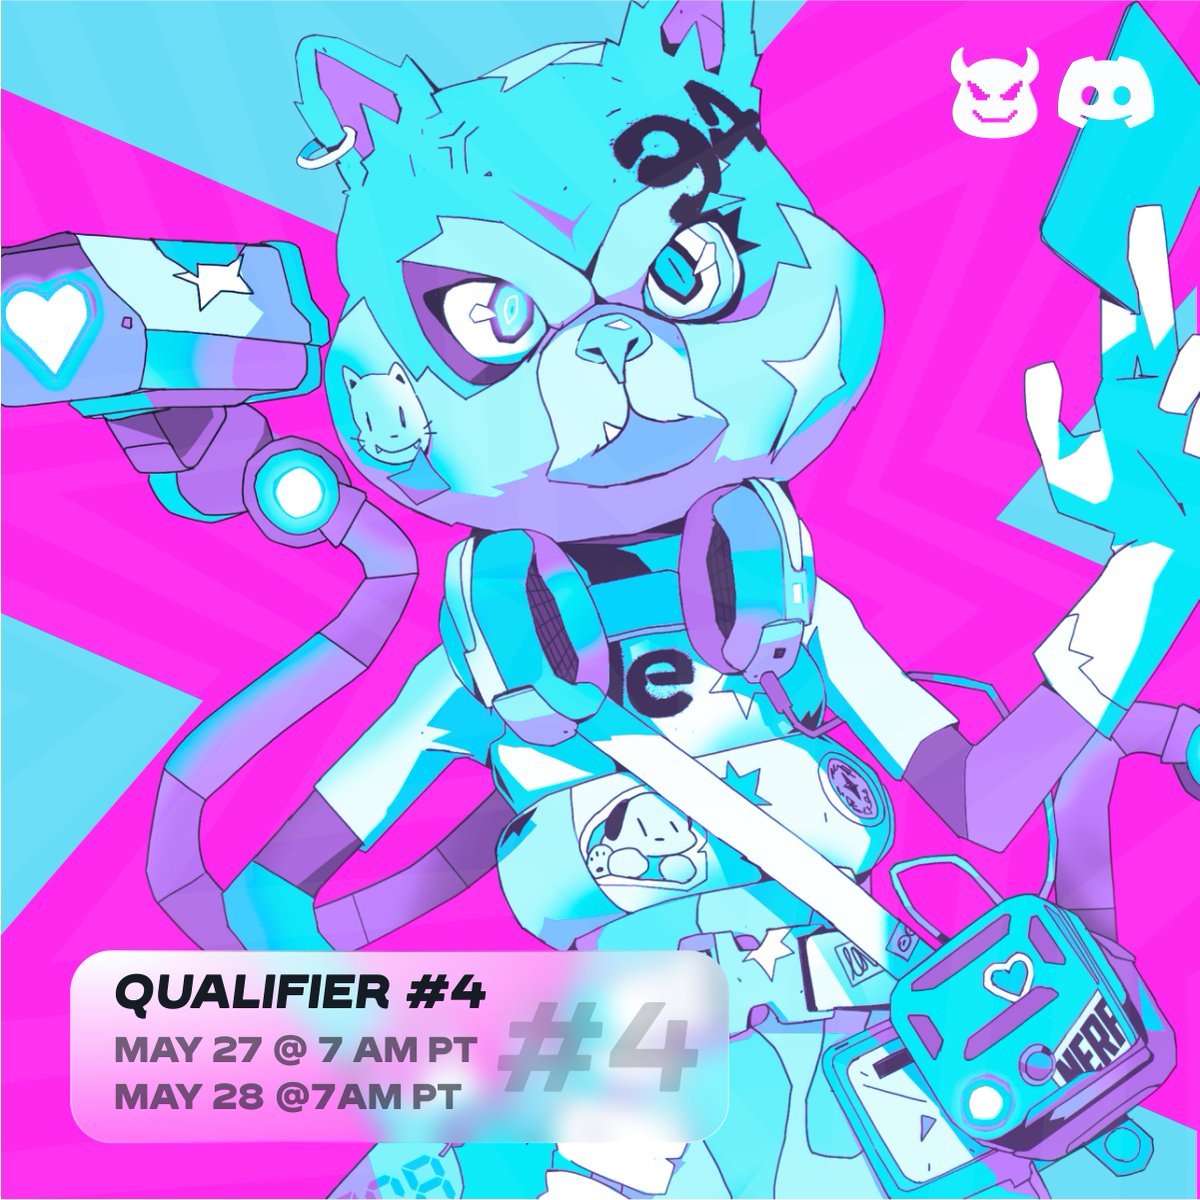 Get ready! Qualifier window 2 starts in 30! 🏁🔥⚡ 💰39,800 SUD$ prize pool 🏆Champion wins the ✨Glitch Pixel✨ 💸Mask holders score bonus prizes - $375 USDC, 3 MixBot Capsules, 50,000 SUD$ Spectate & wager SUD$ in Watch & Bet! 🤯🍿 Full details on Discord 🔗👆 #MixMobRacer1